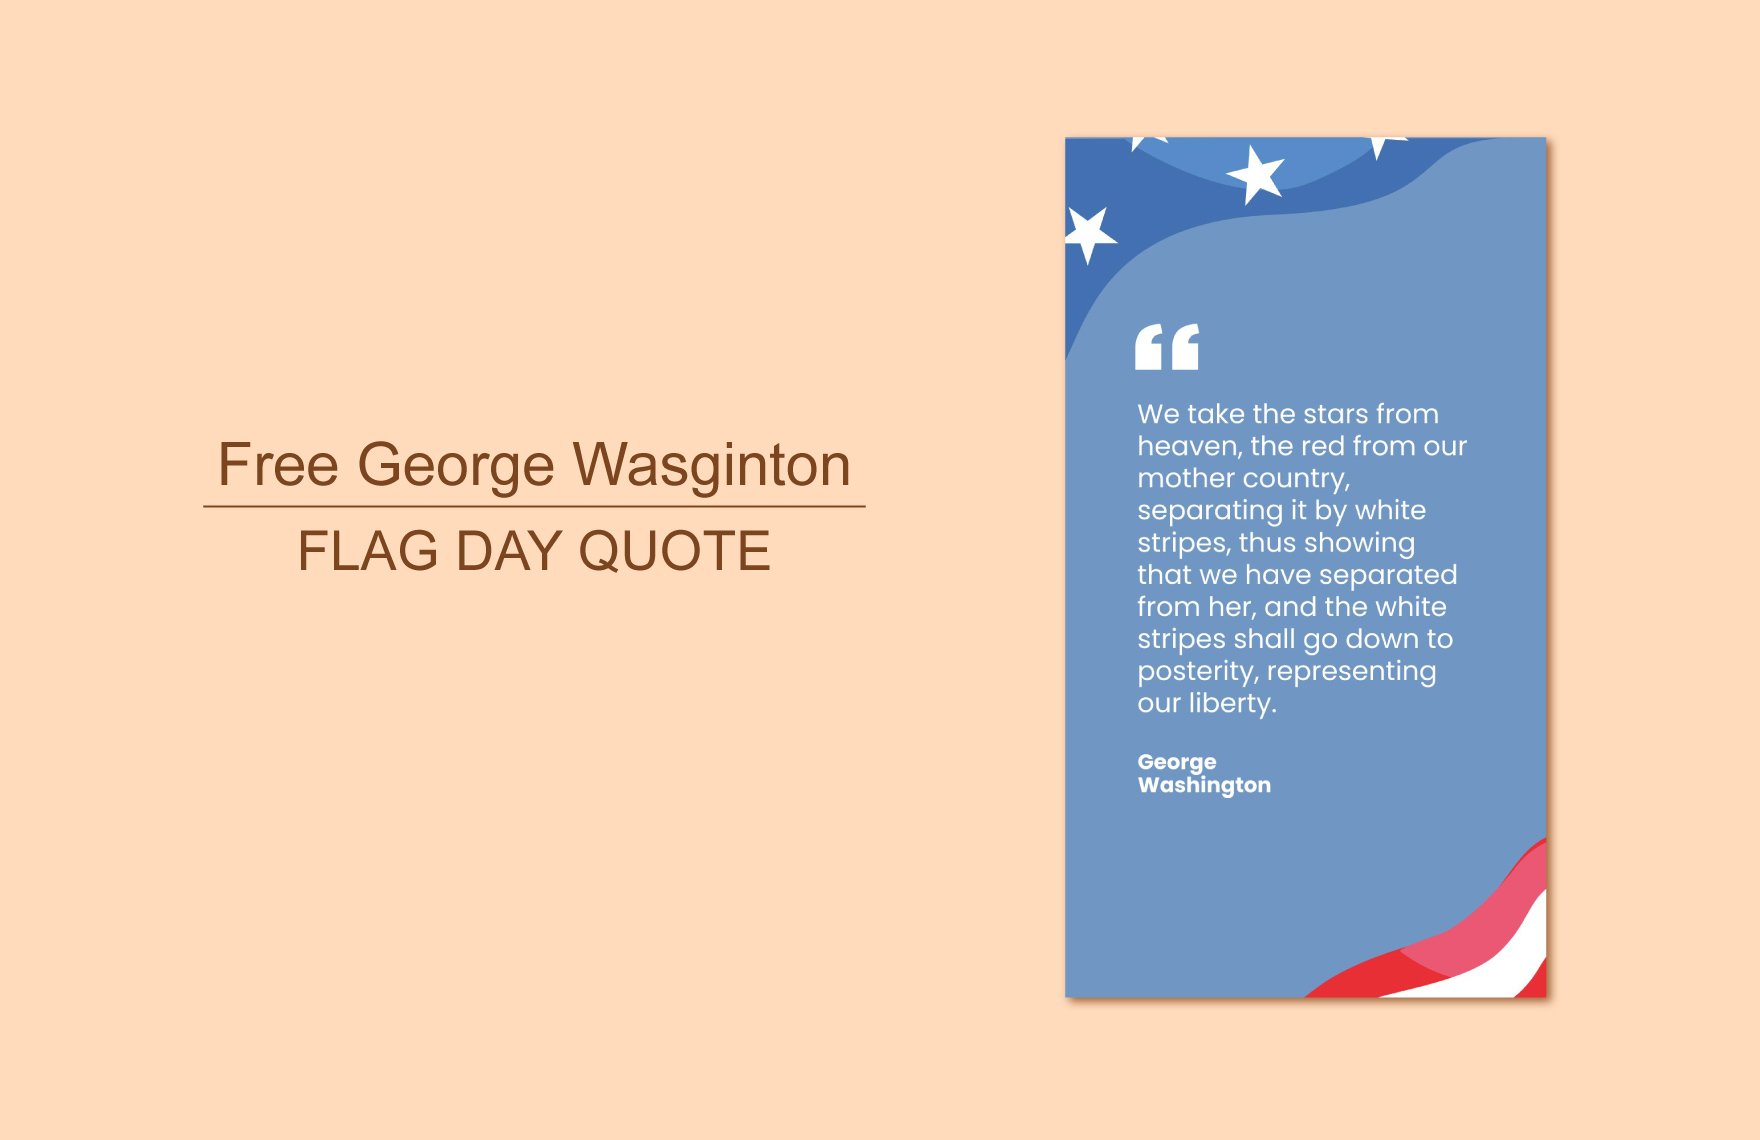 George Washington attributed - We take the stars from heaven, the red from our mother country, separating it by white stripes, thus showing that we have separated from her, and the white stripes shall